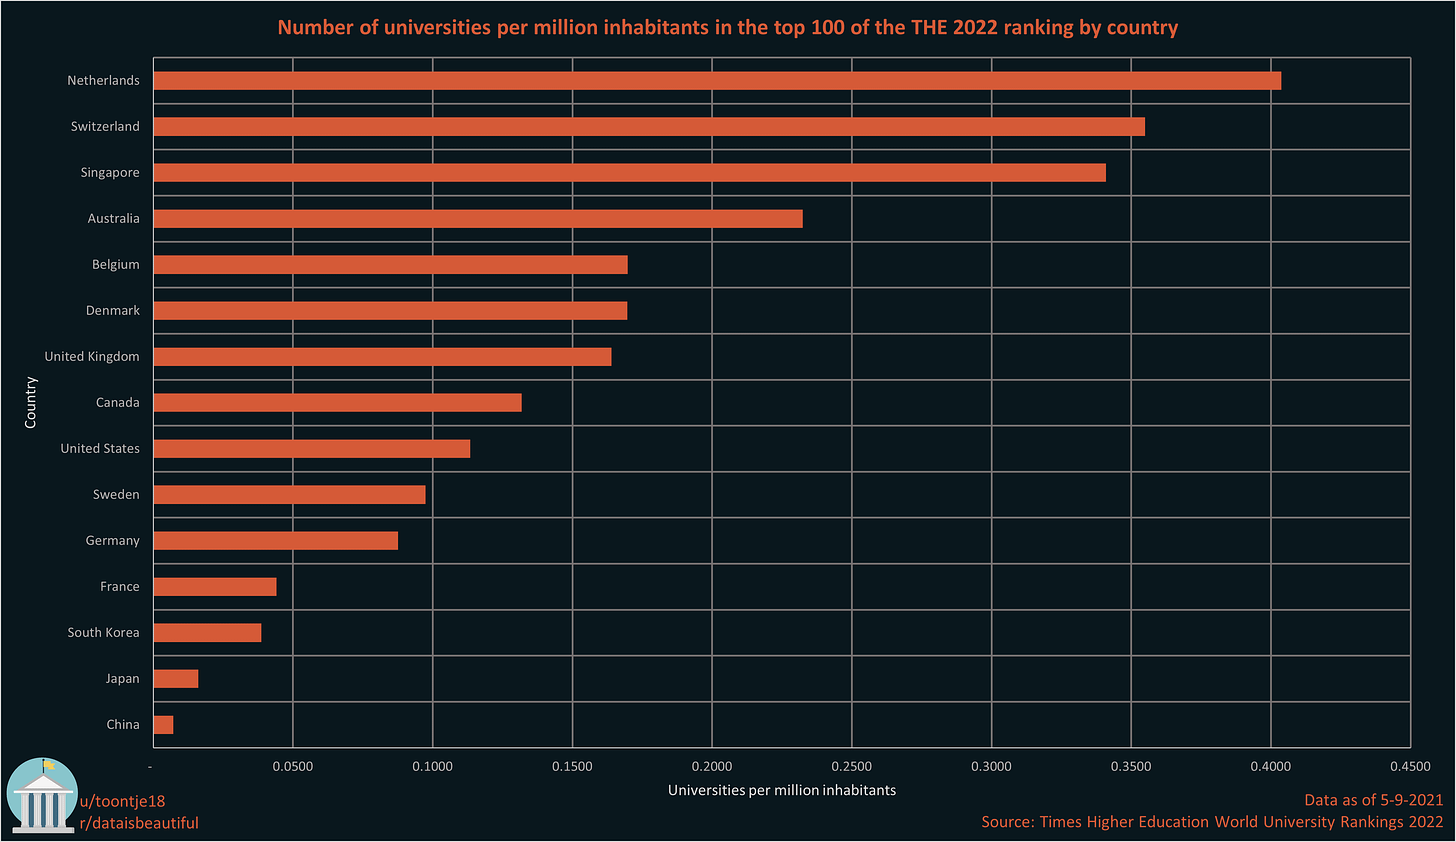 r/dataisbeautiful - Number of universities per million inhabitants in the top 100 of the THE 2022 ranking by country